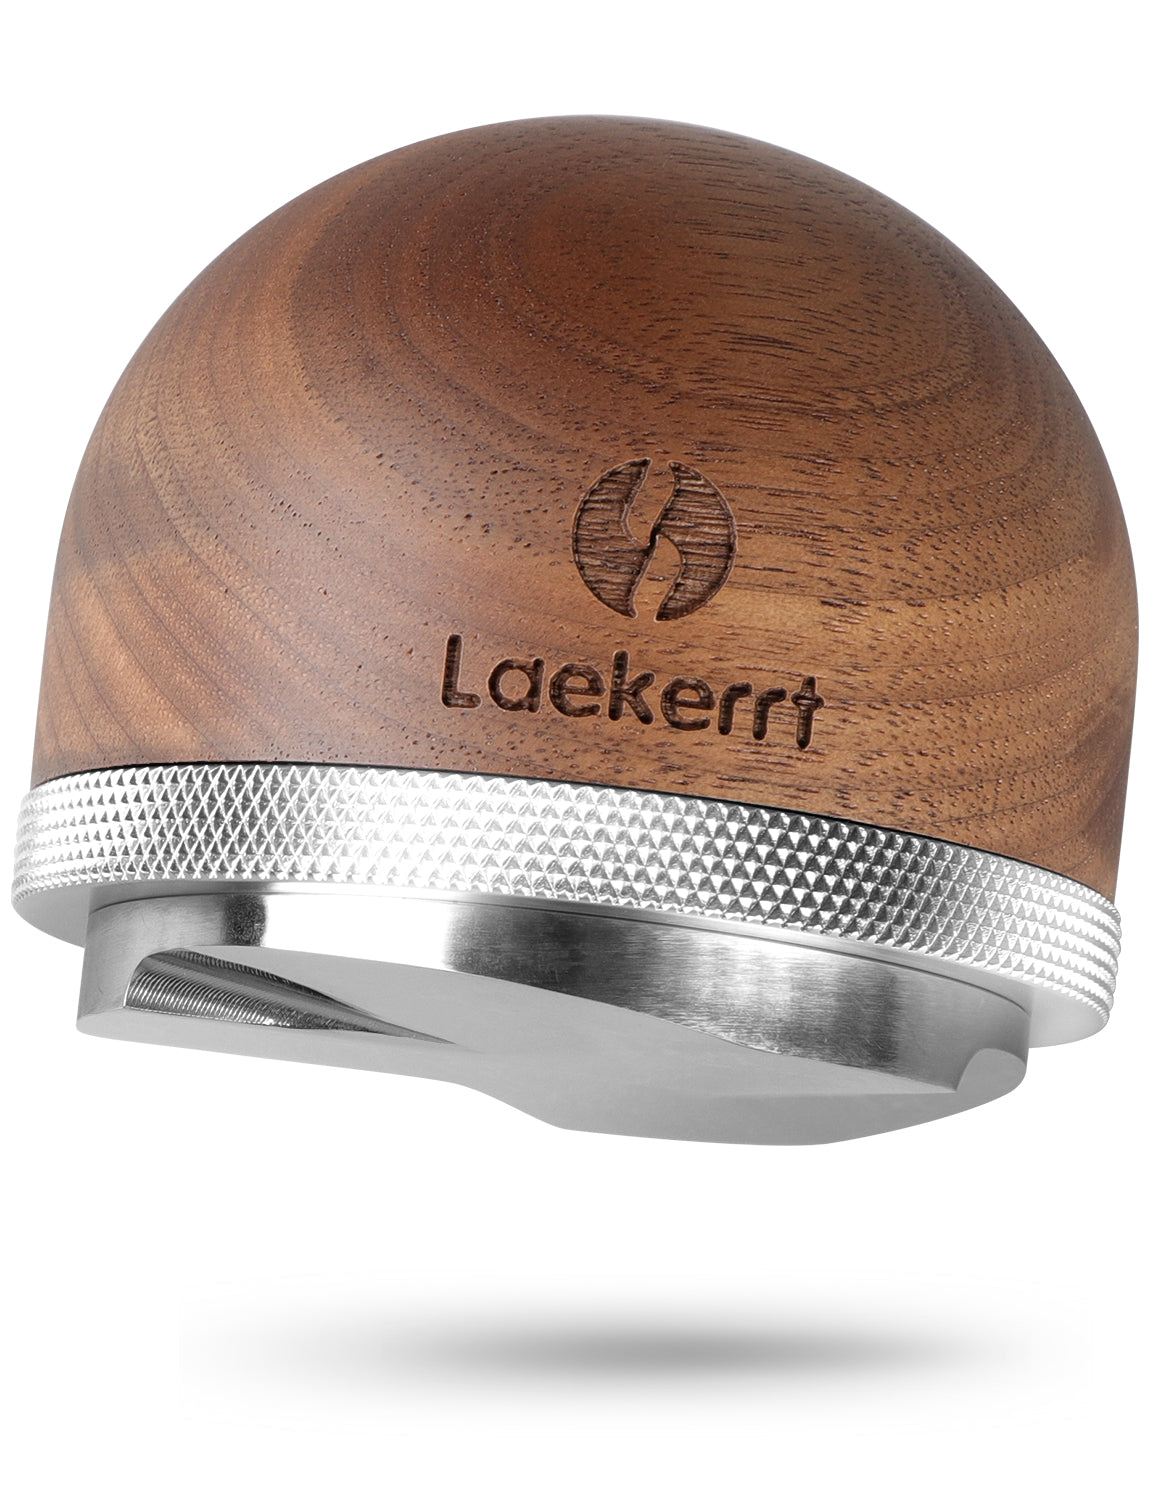 Laekerrt 53mm Espresso Coffee Distributor, Stainless Steel Base Coffee Leveler with Unique Spherical Wood Handle, Fits for Breville 54mm Portafilter, Adjustable Depth Espresso Distribution Tool